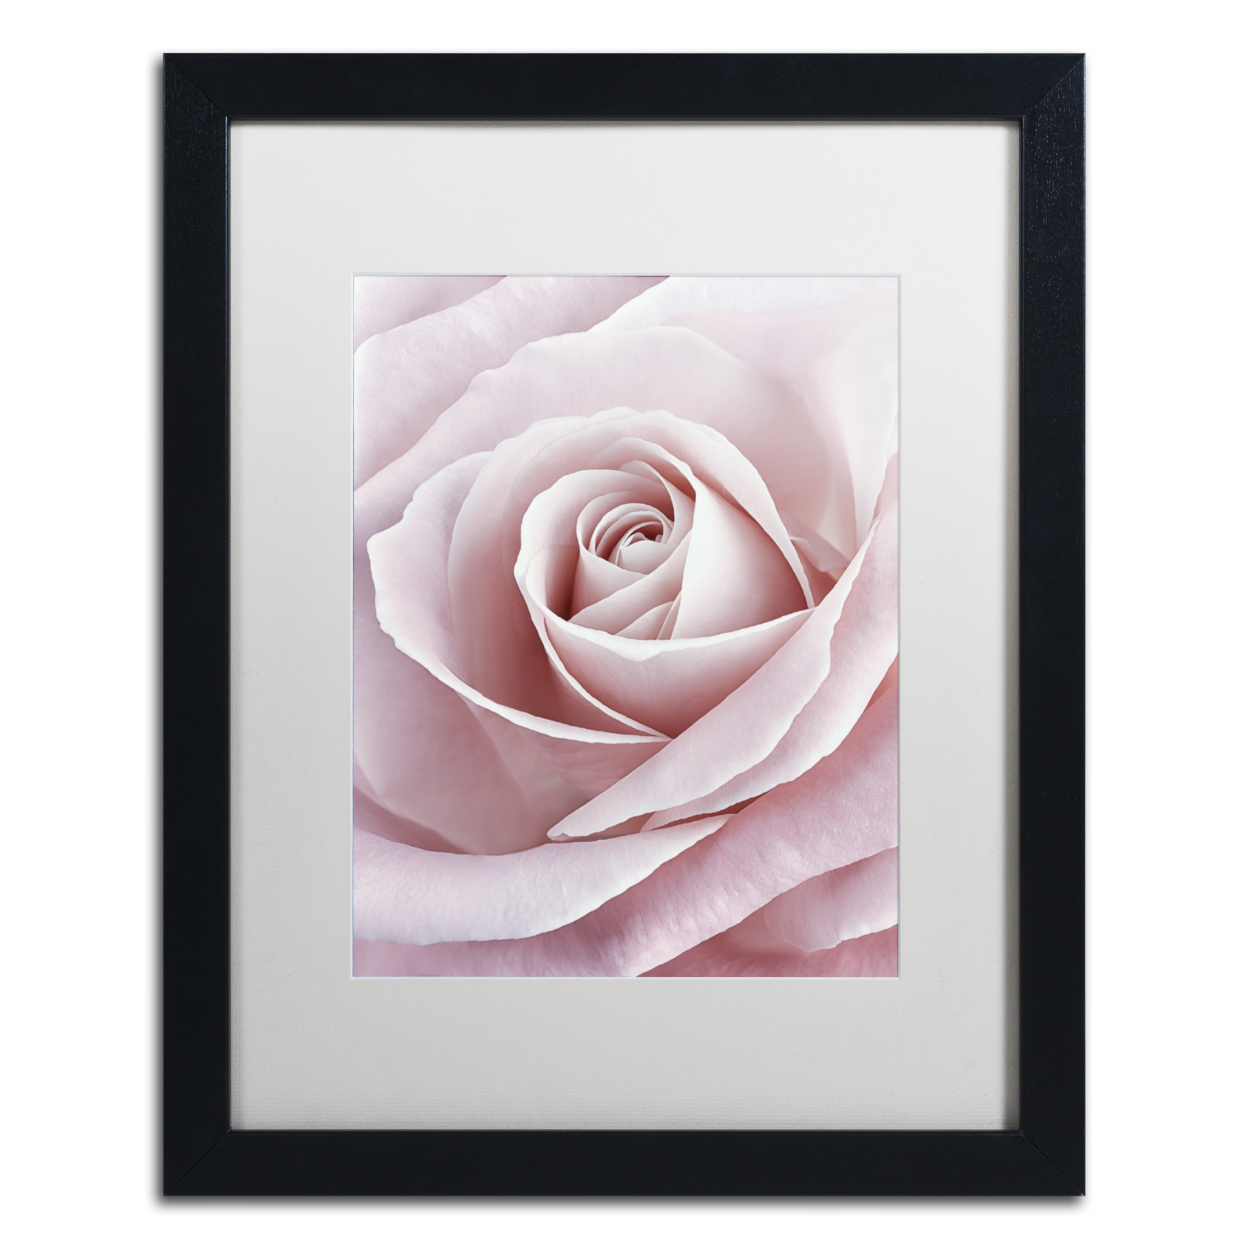 Cora Niele 'Pink Rose' Black Wooden Framed Art 18 X 22 Inches